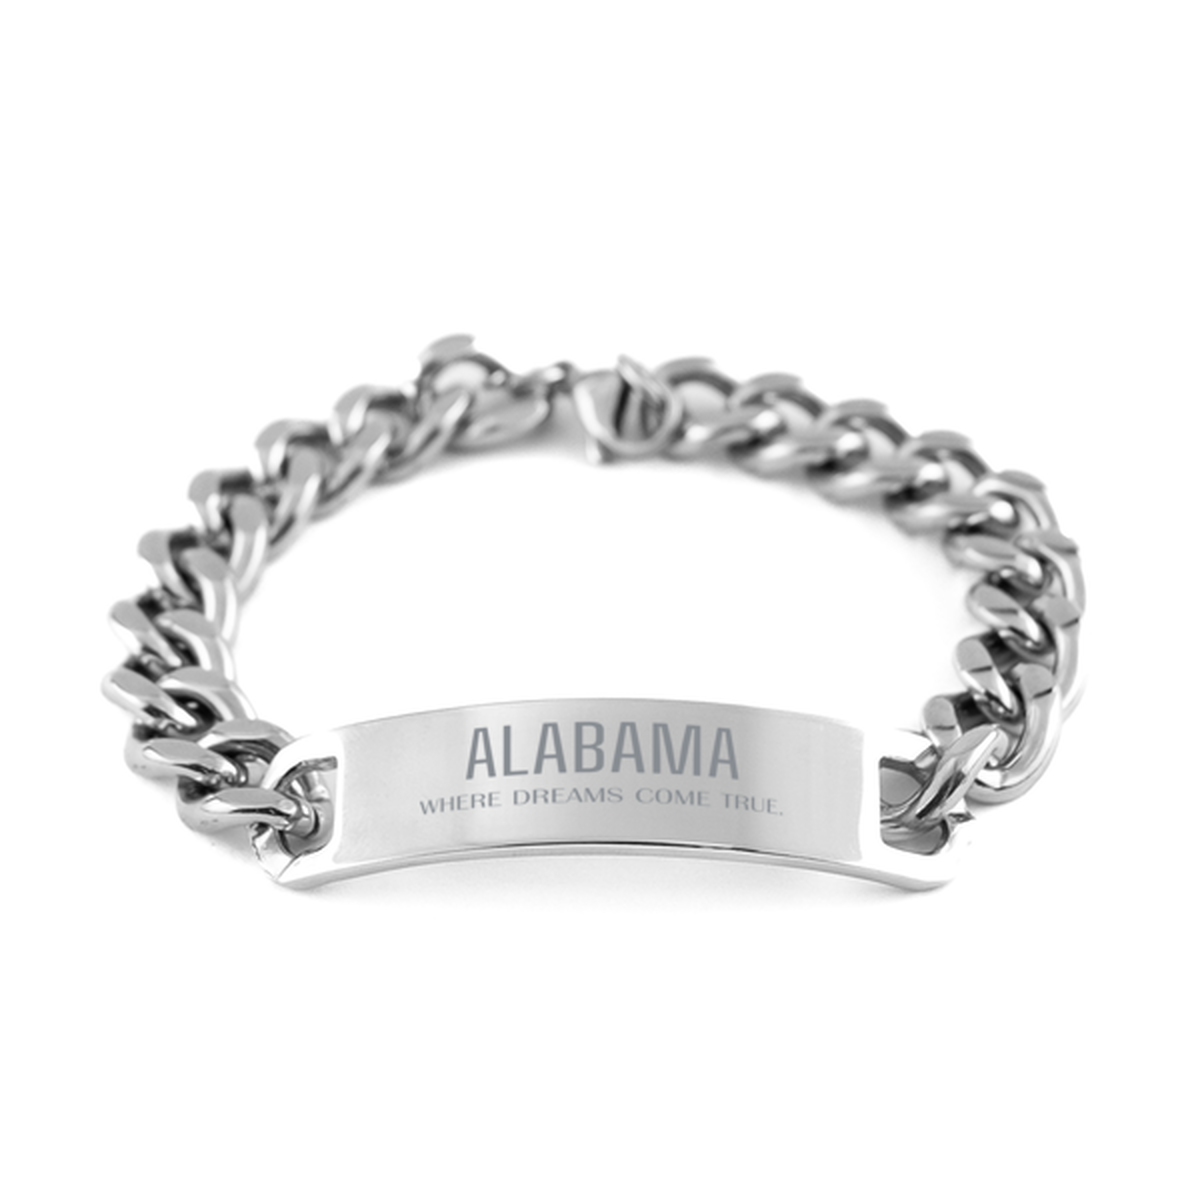 Love Alabama State Cuban Chain Stainless Steel Bracelet, Alabama Where dreams come true, Birthday Inspirational Gifts For Alabama Men, Women, Friends